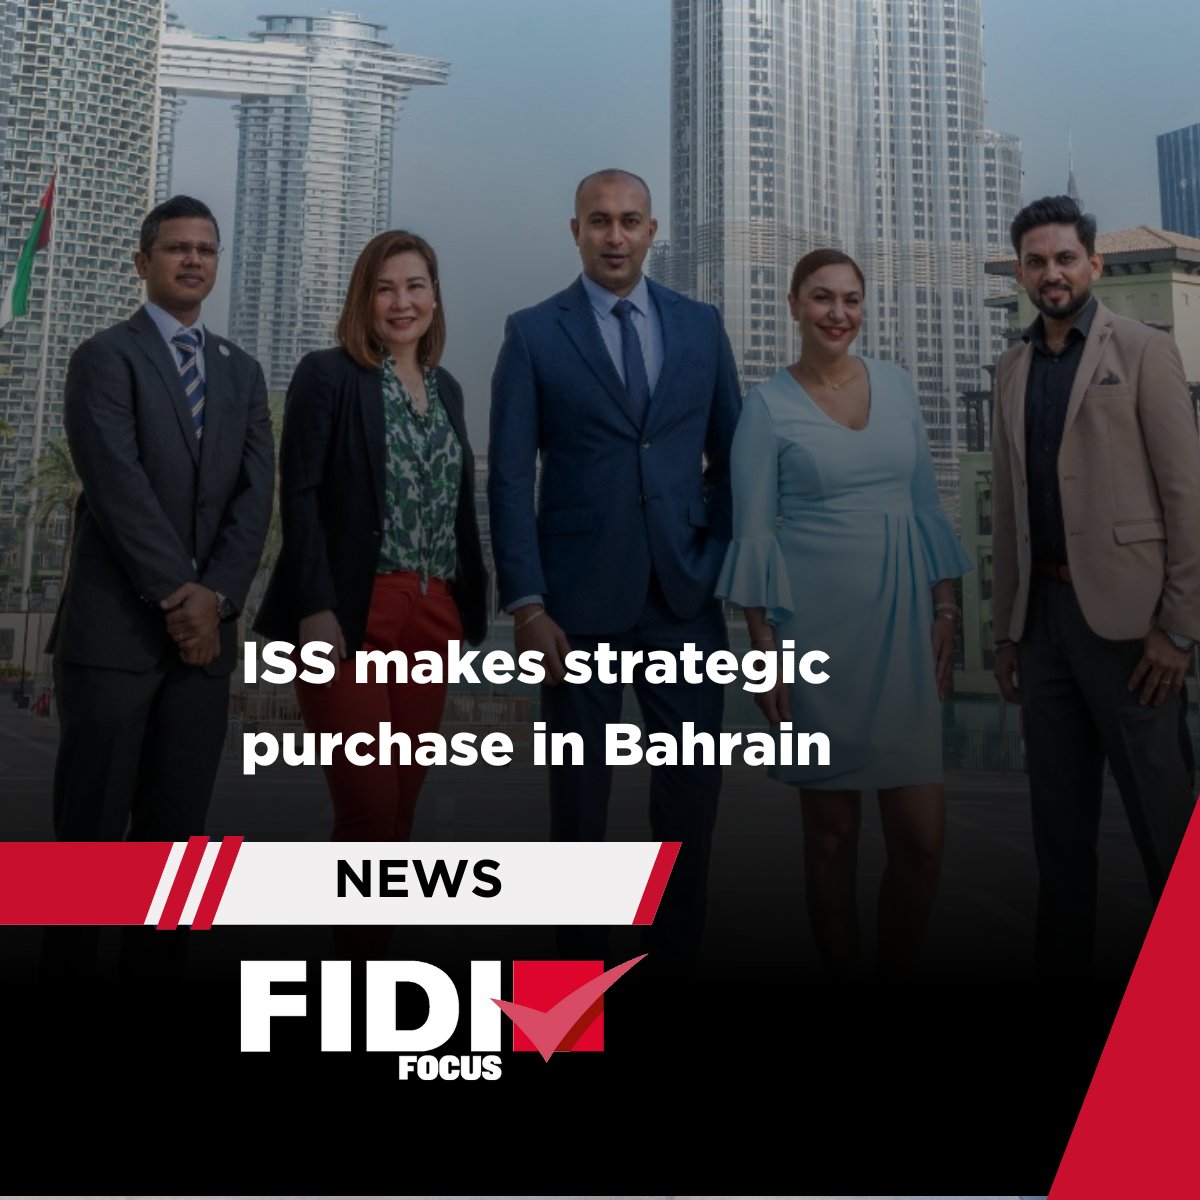 Dubai-headquartered ISS Relocations has announced the acquisition of the relocation arm of Ahmadi Cargo and Packing, as part of plans to expand its operations in Bahrain.

Read more ➡️ fidifocus.org/news/iss-makes…

#News #FIDI #merge #bahrain #globalmobility